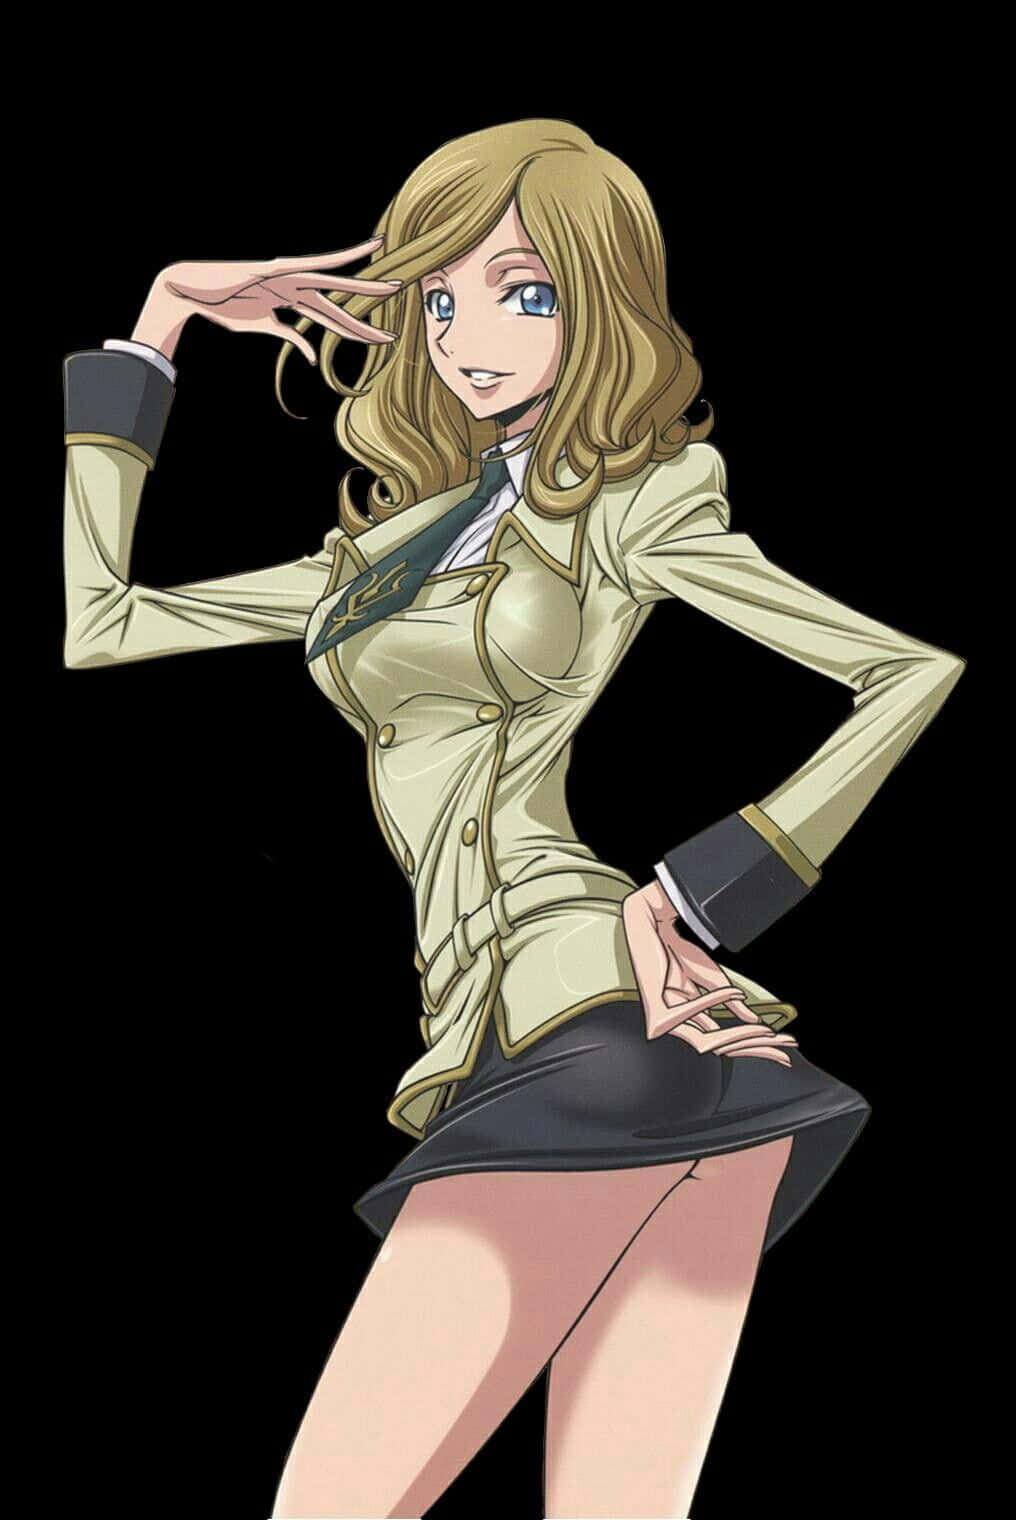 Milly Ashford striking a confident pose in Code Geass Wallpaper